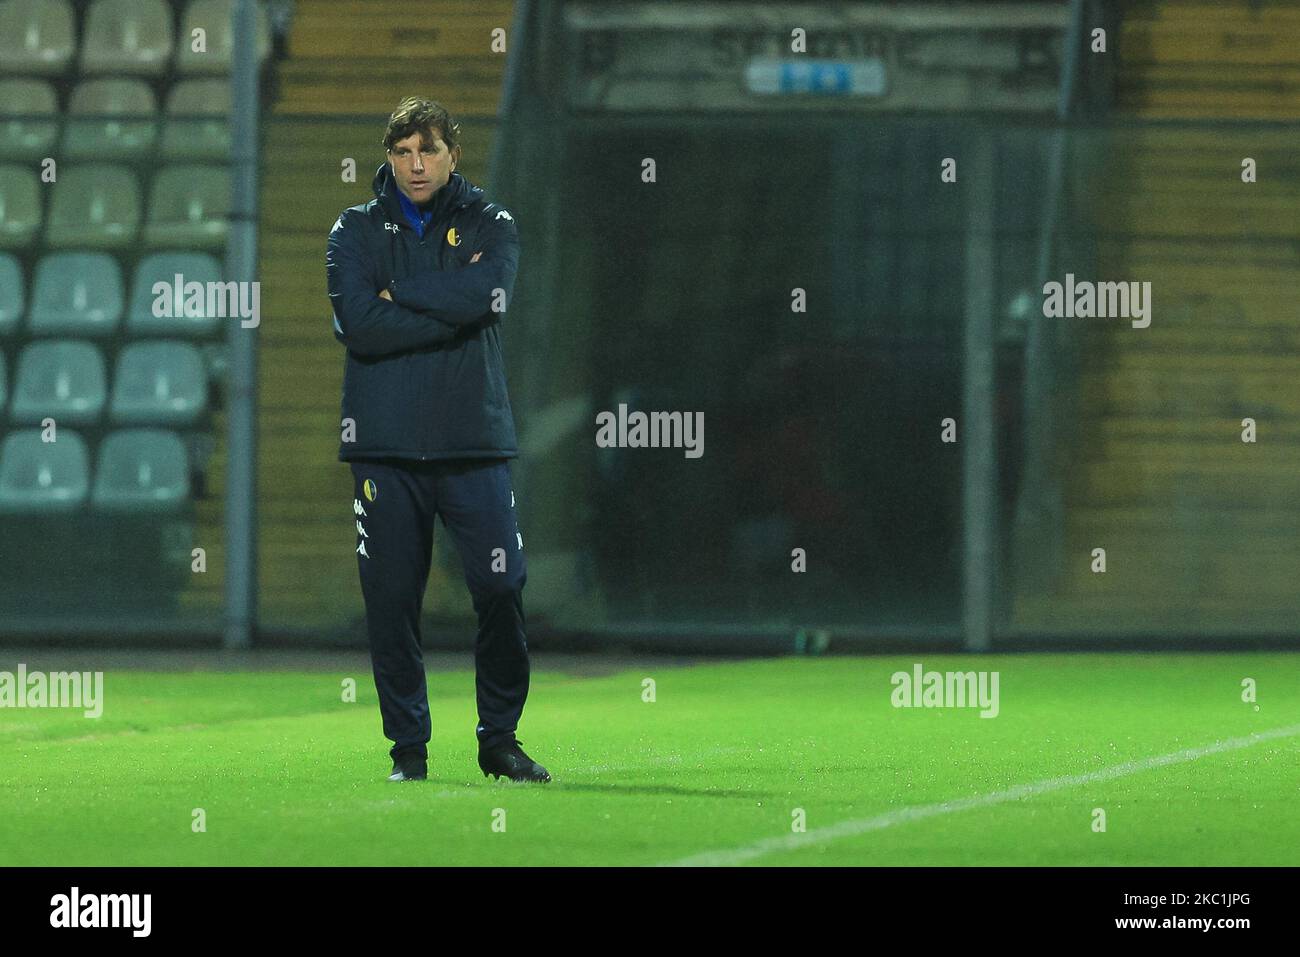 Michele Mignani during the Serie C match between Modena and Ravenna at Stadio Braglia on October 11, 2020 in Modena, Italy. (Photo by Emmanuele Ciancaglini/NurPhoto) Stock Photo